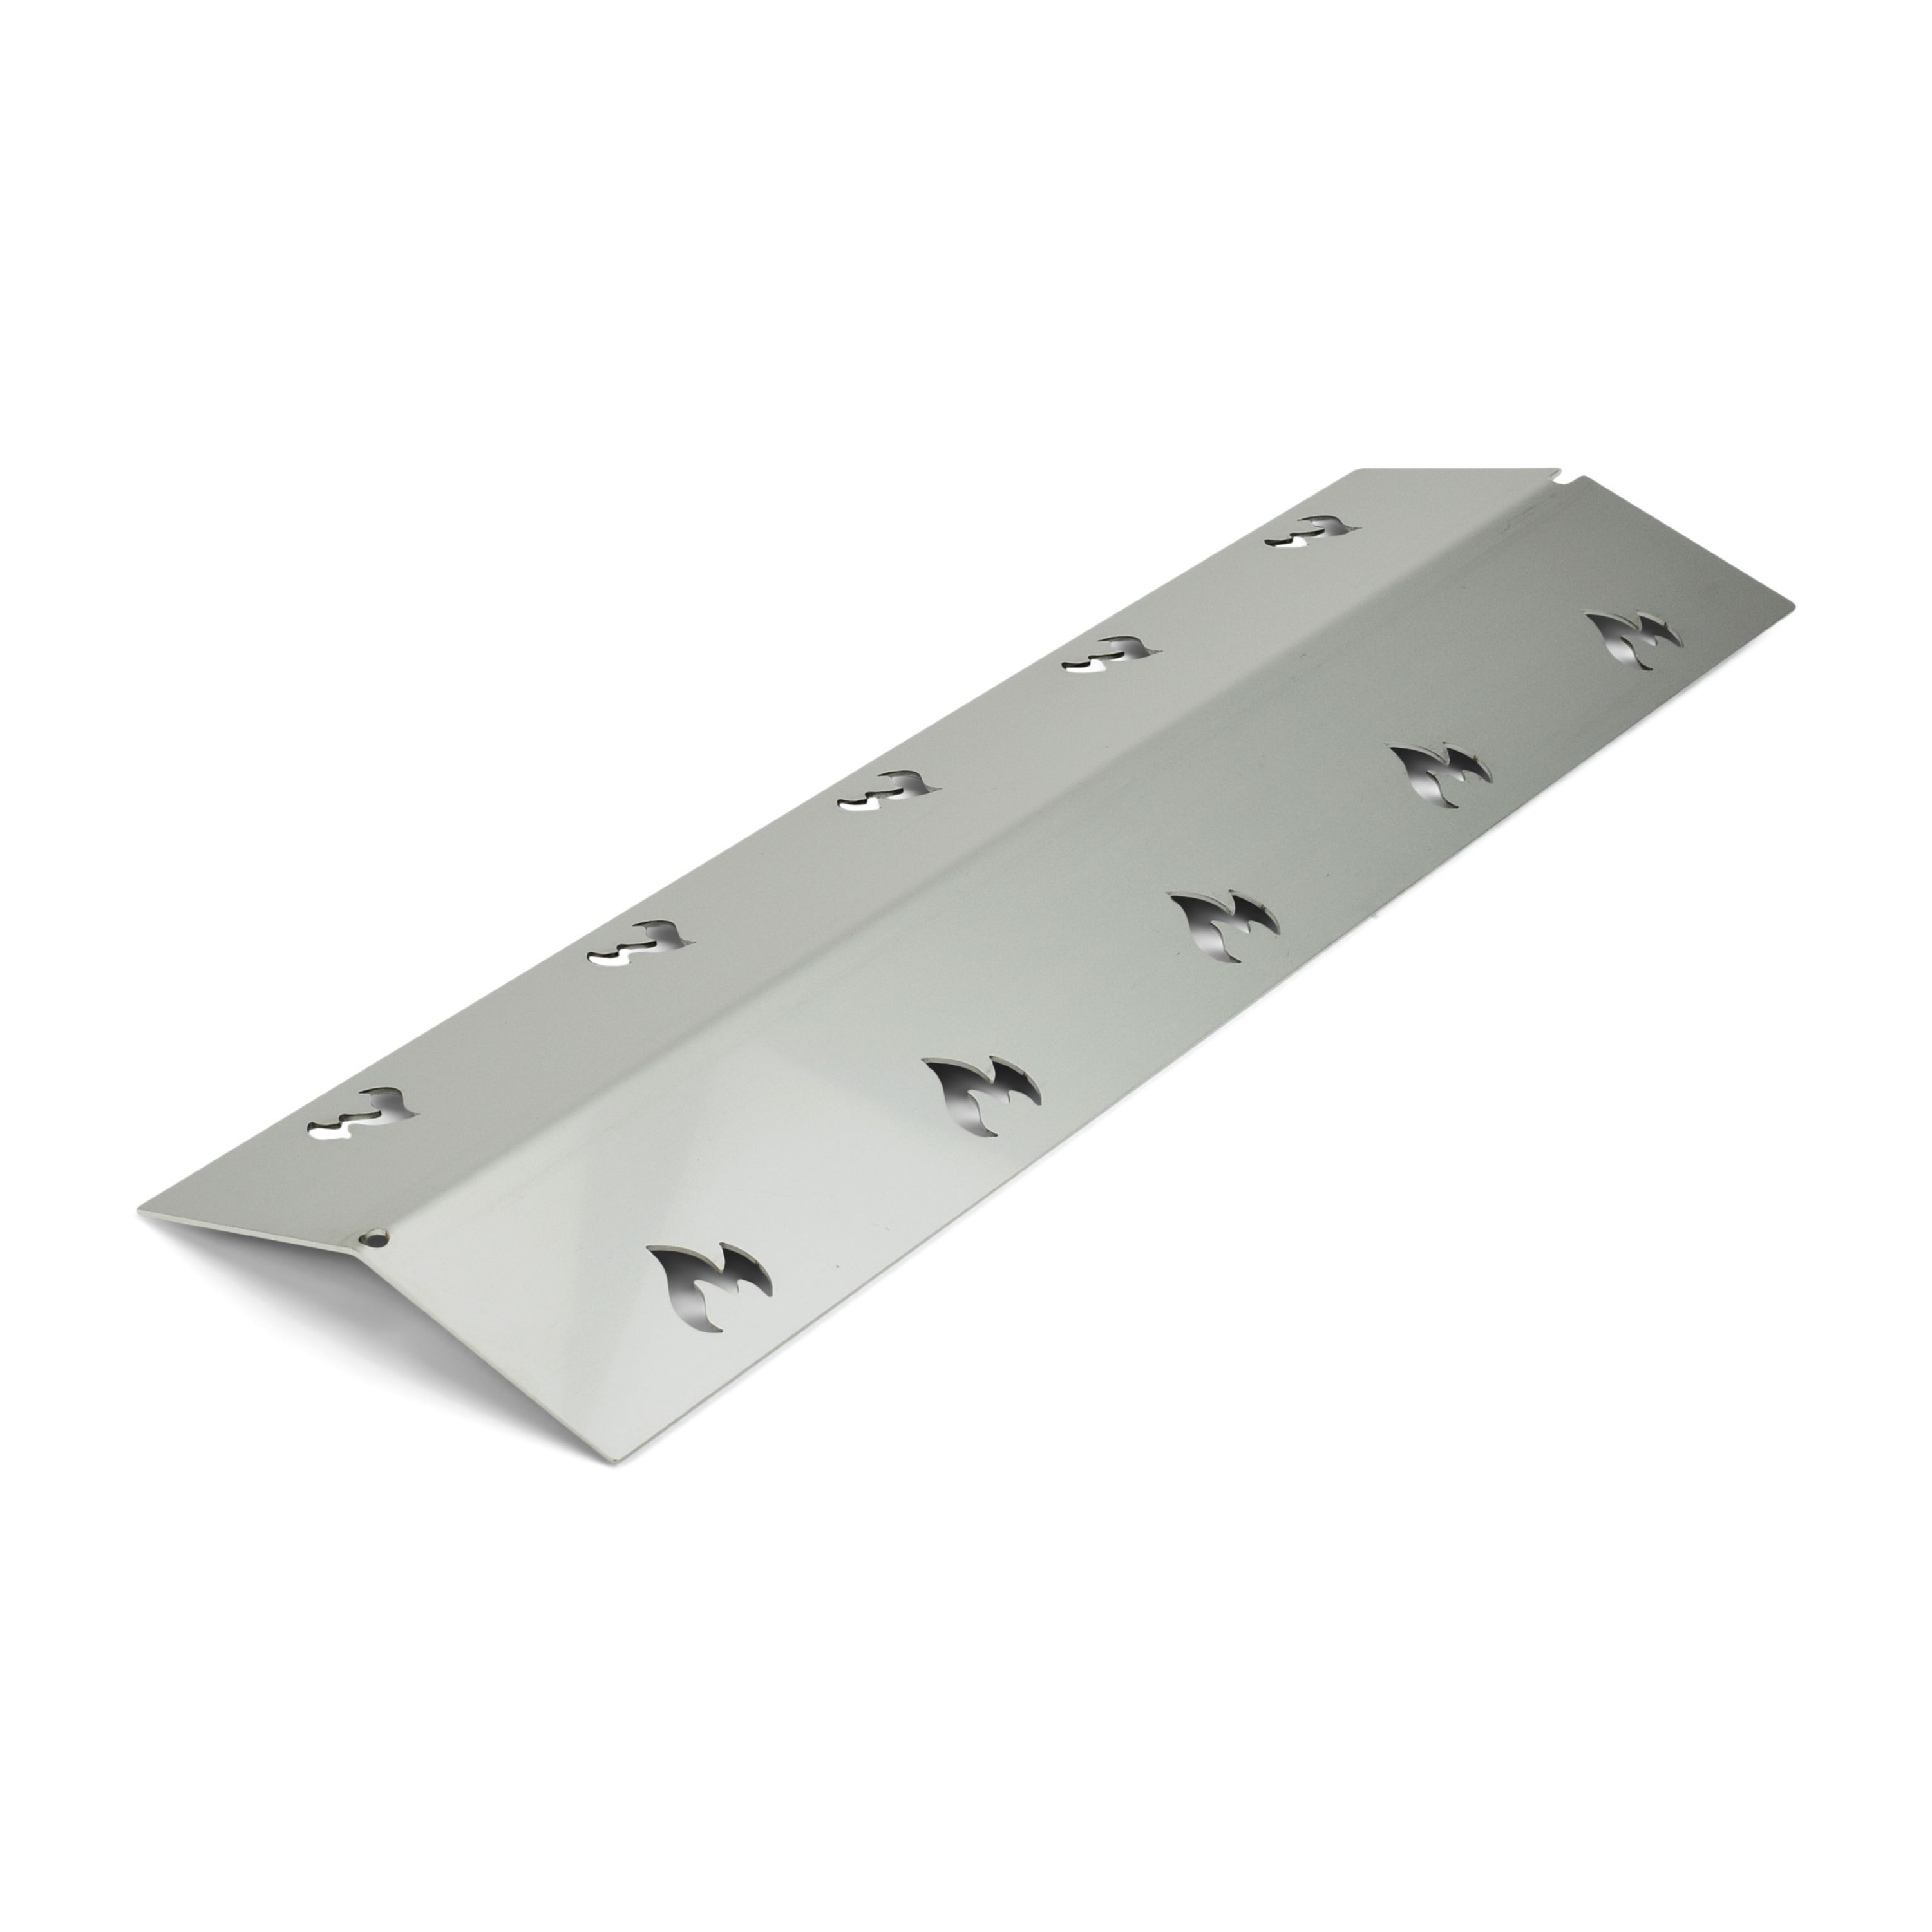 Stainless steel burner cover 39 x 12.5 cm Replacement aroma rail outlives your barbecue